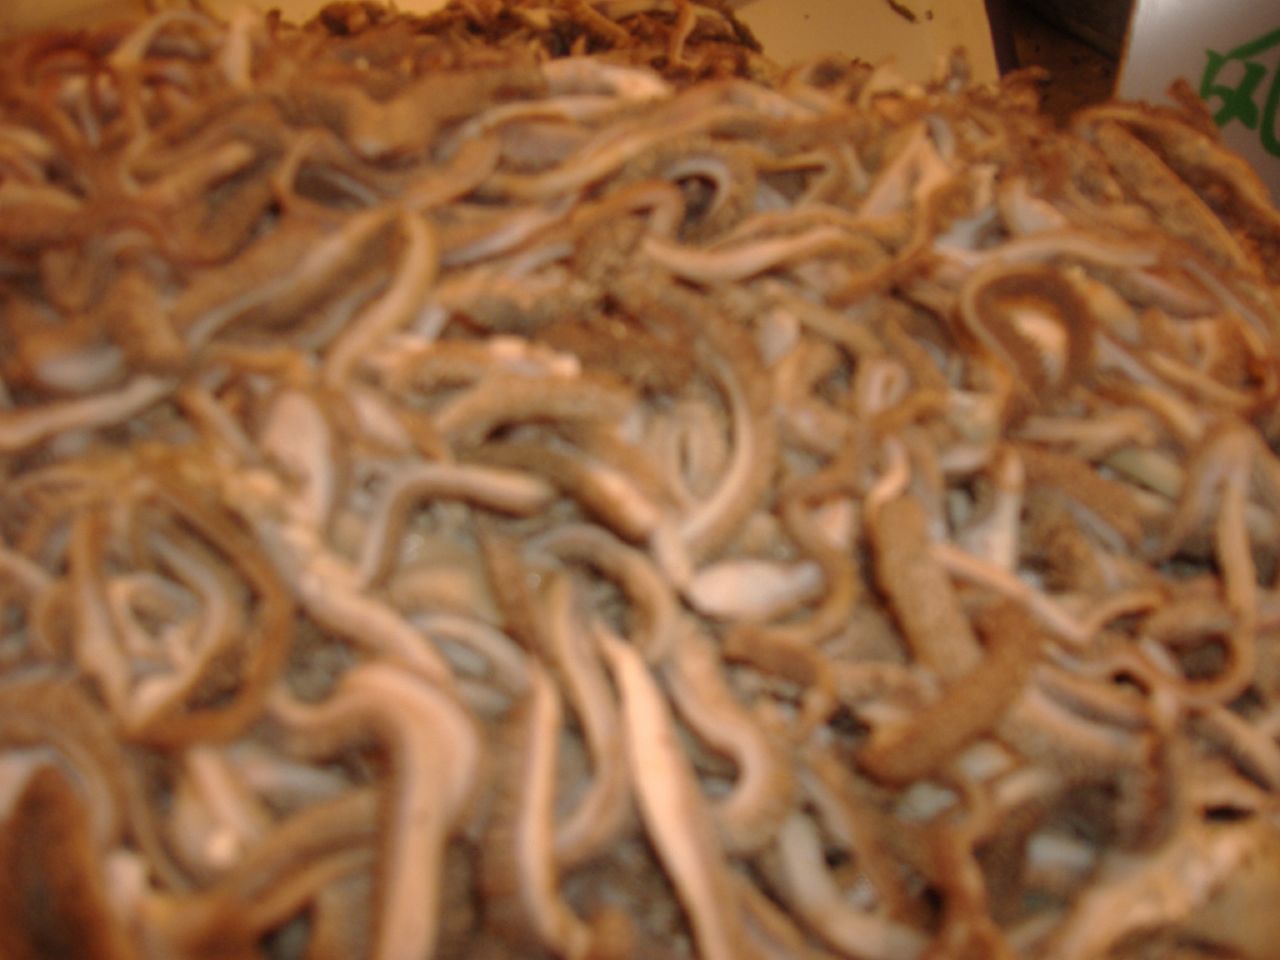 a group of food with a pile of worms sticking out of it